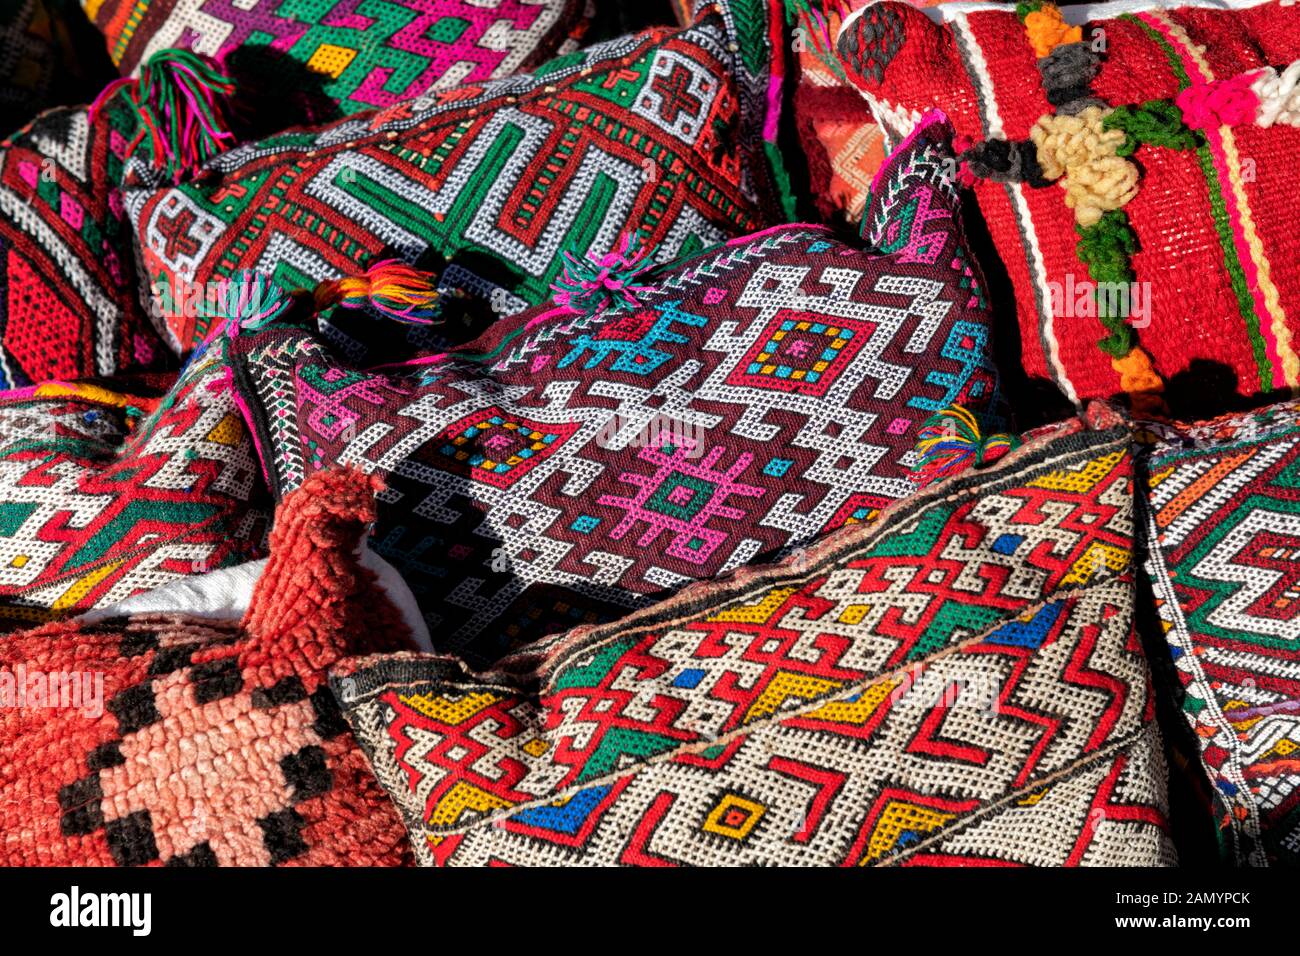 Colorful Moroccan cushions with traditional Berber design. Stock Photo